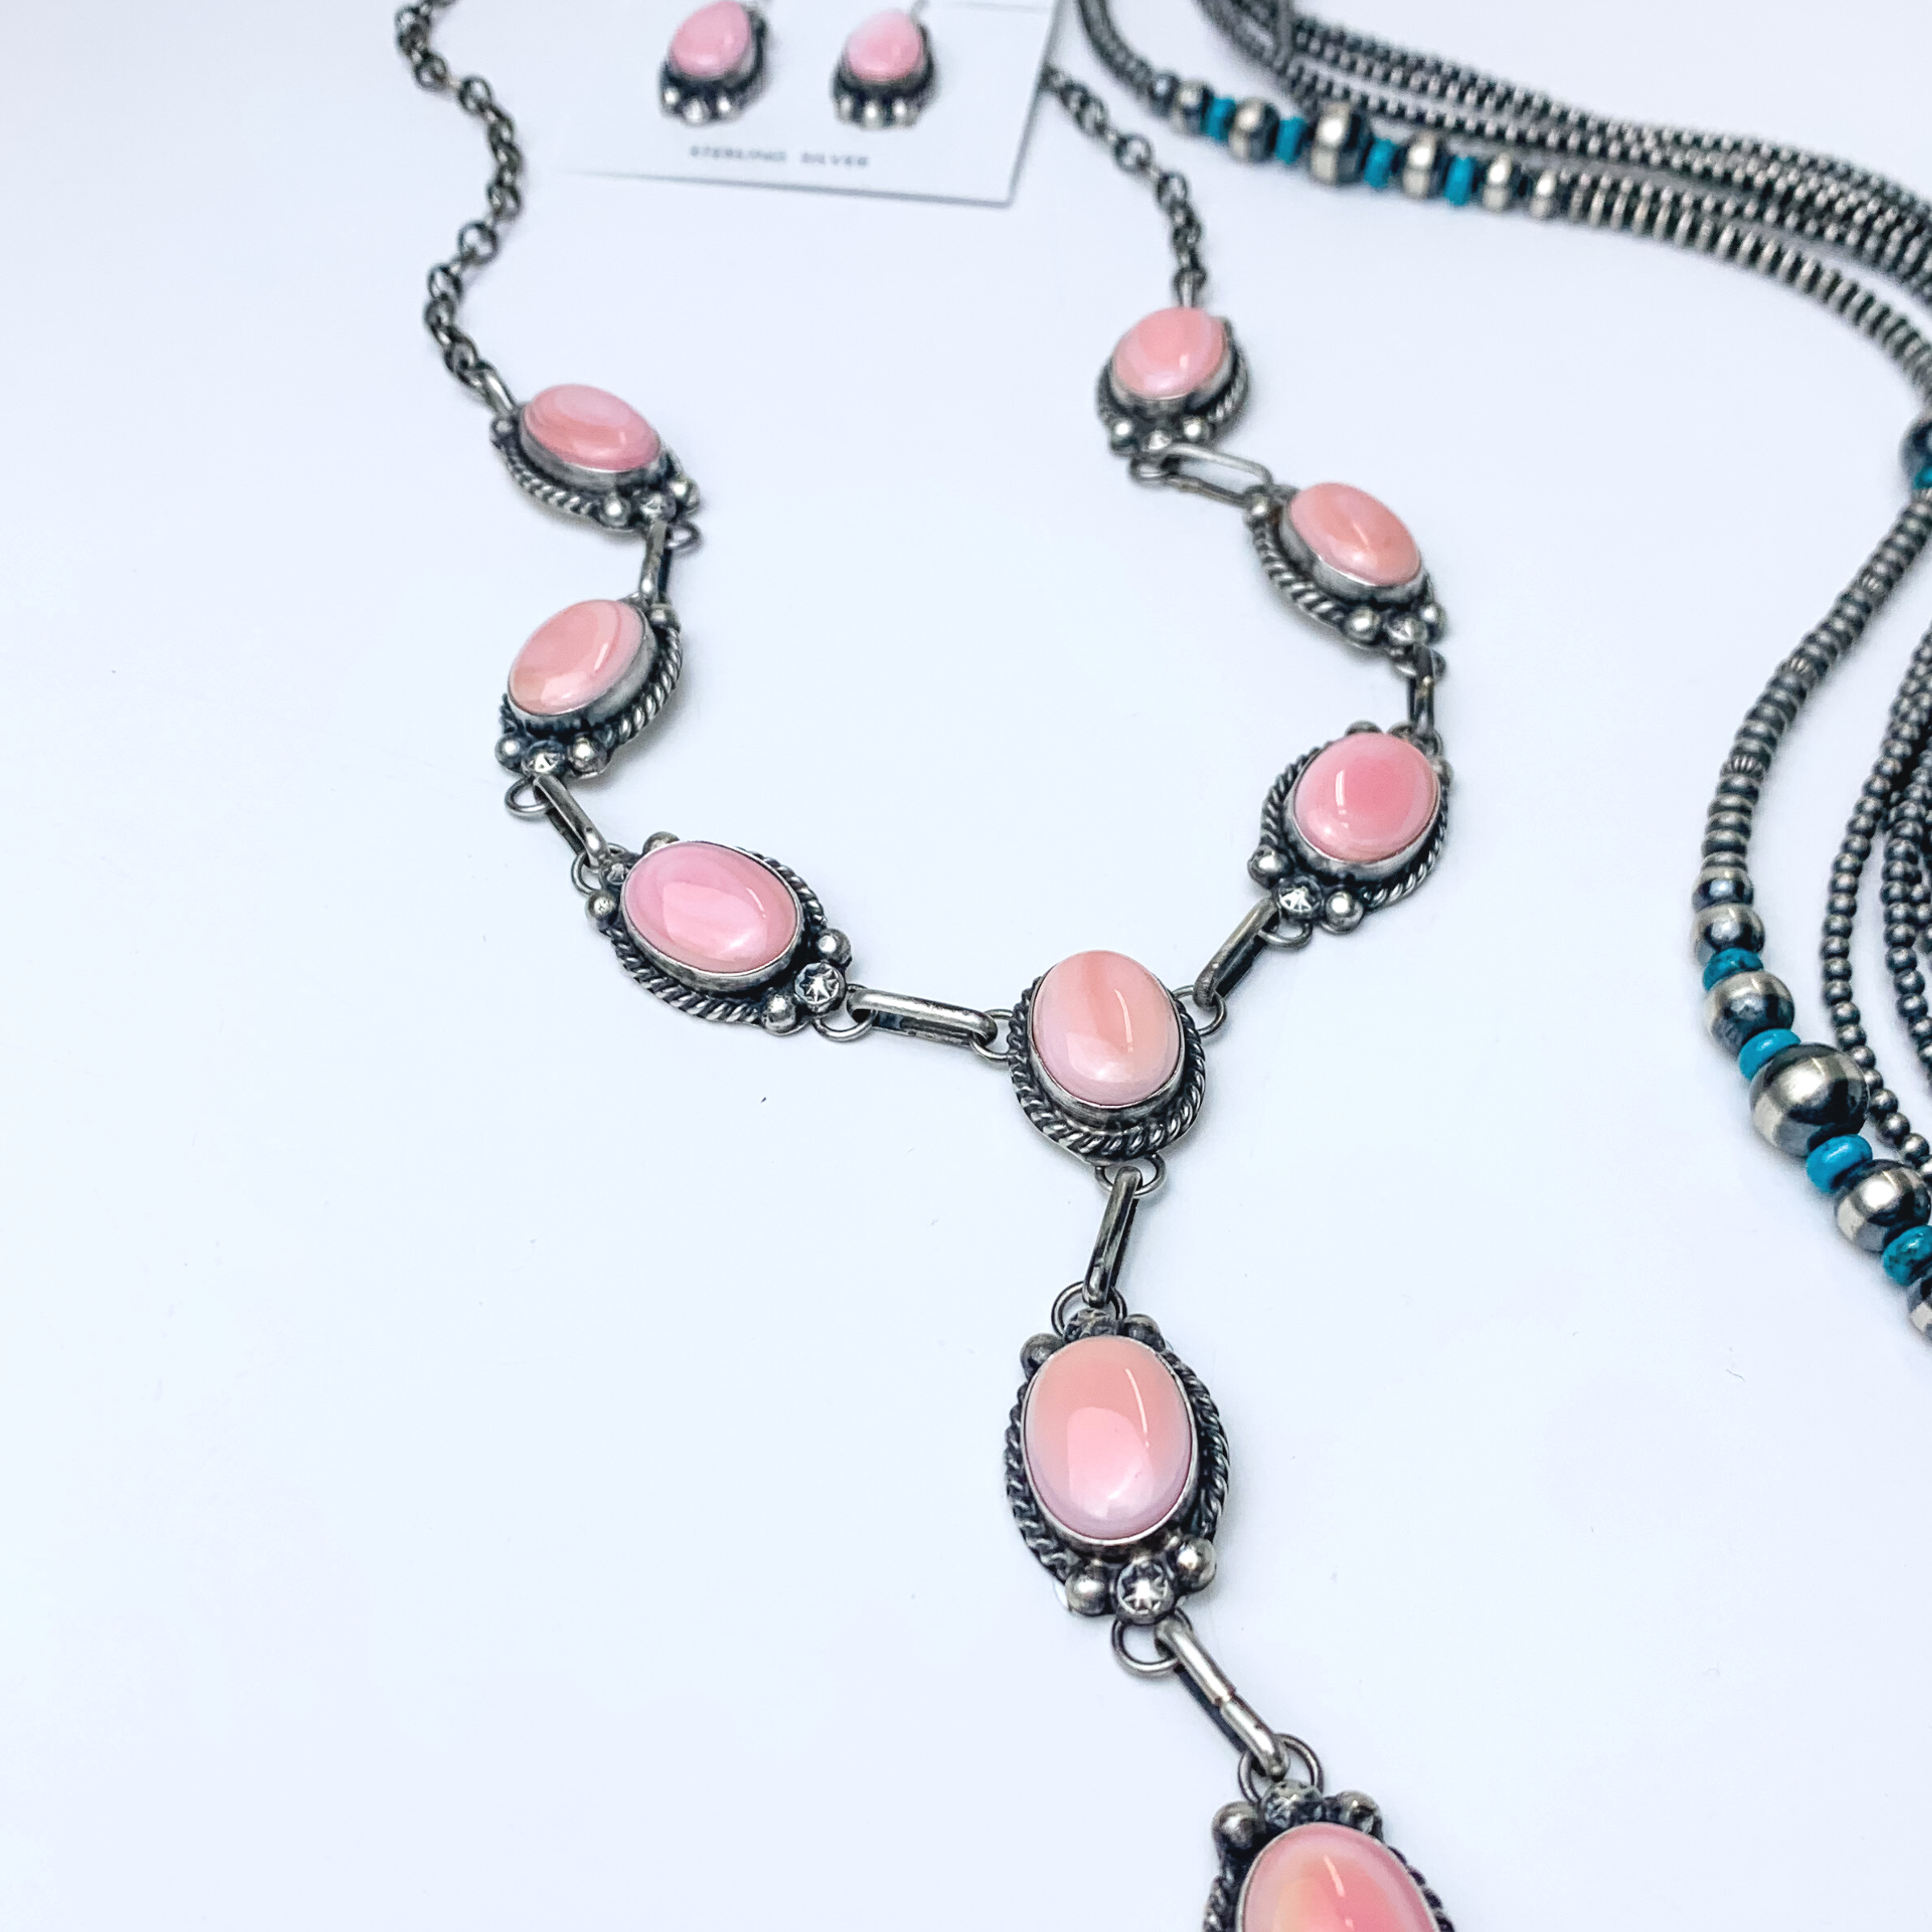 Augustine Largo | Navajo Handmade Sterling Silver & Pink Conch Stones Lariat Necklace + Matching Earrings - Giddy Up Glamour Boutique